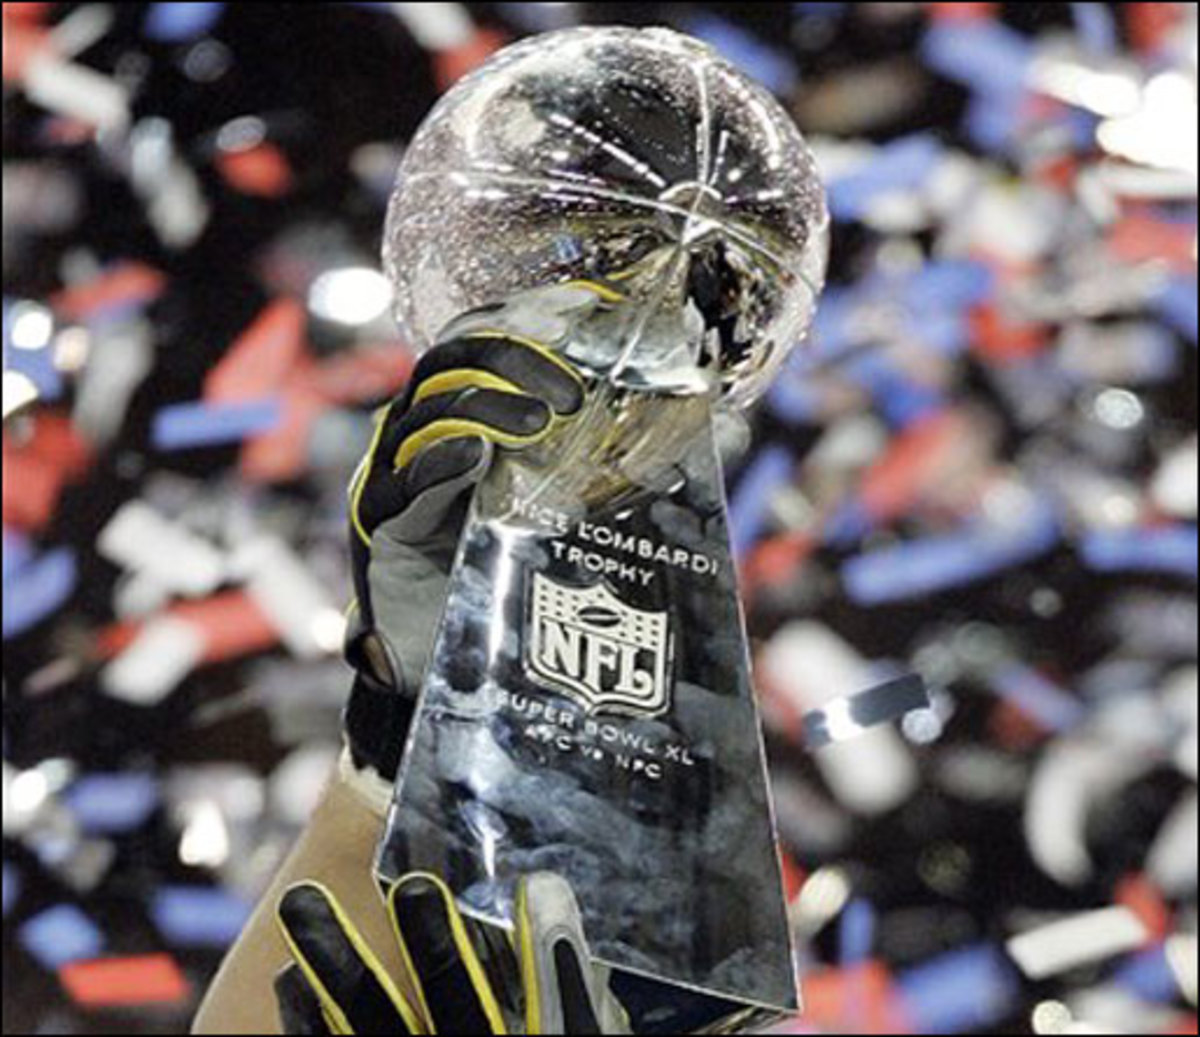 The fantasy football Super Bowl is kind of like the real Super Bowl, just without the millions of people watching and funny commercials.